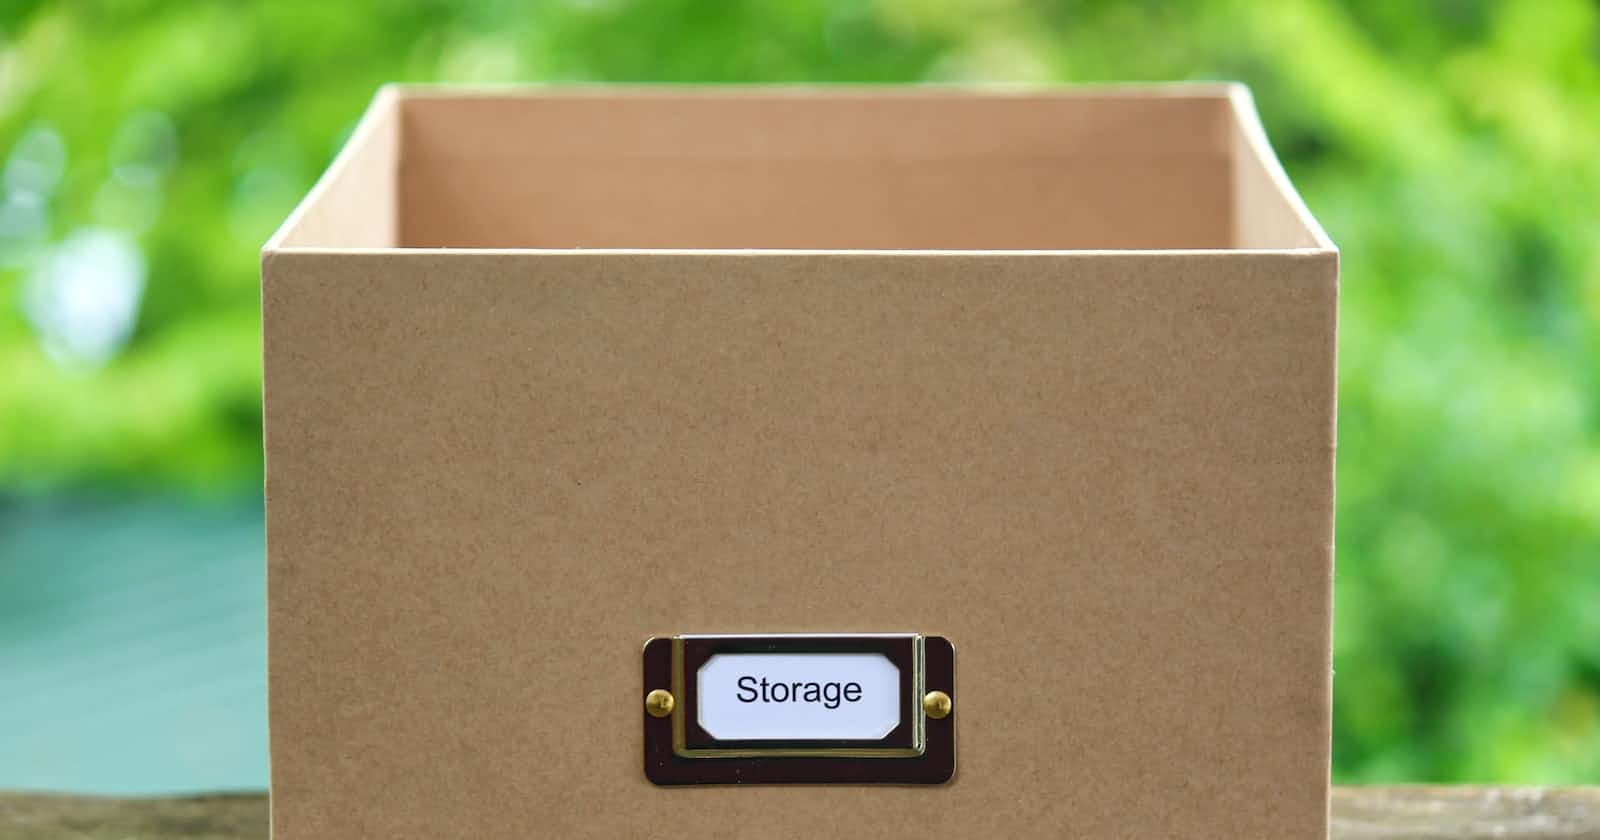 Better storage system
(DataStore  or Shared preference)